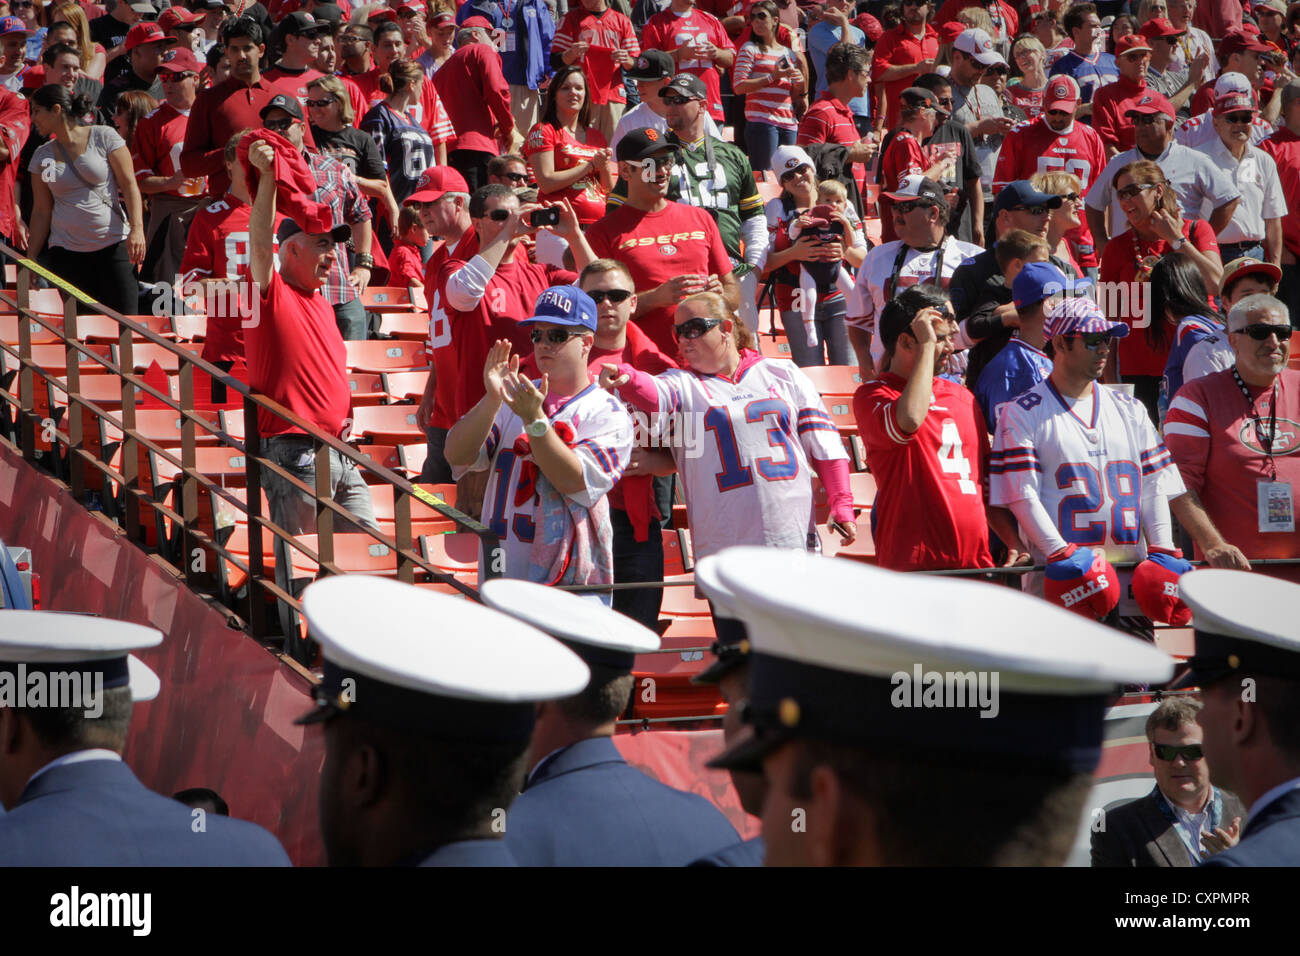 Football fans at the San Francisco 49ers vs. Buffalo Bills game at Candlestick Park give a standing ovation to U.S. Marines, sailors, coast guardsmen and members of the Royal Canadian Navy as they leave the field after the pregame show, Oct. 7, 2012. The service members with San Francisco Fleet Week 2012 marched on to the field to salute during the singing of the national anthem. Stock Photo